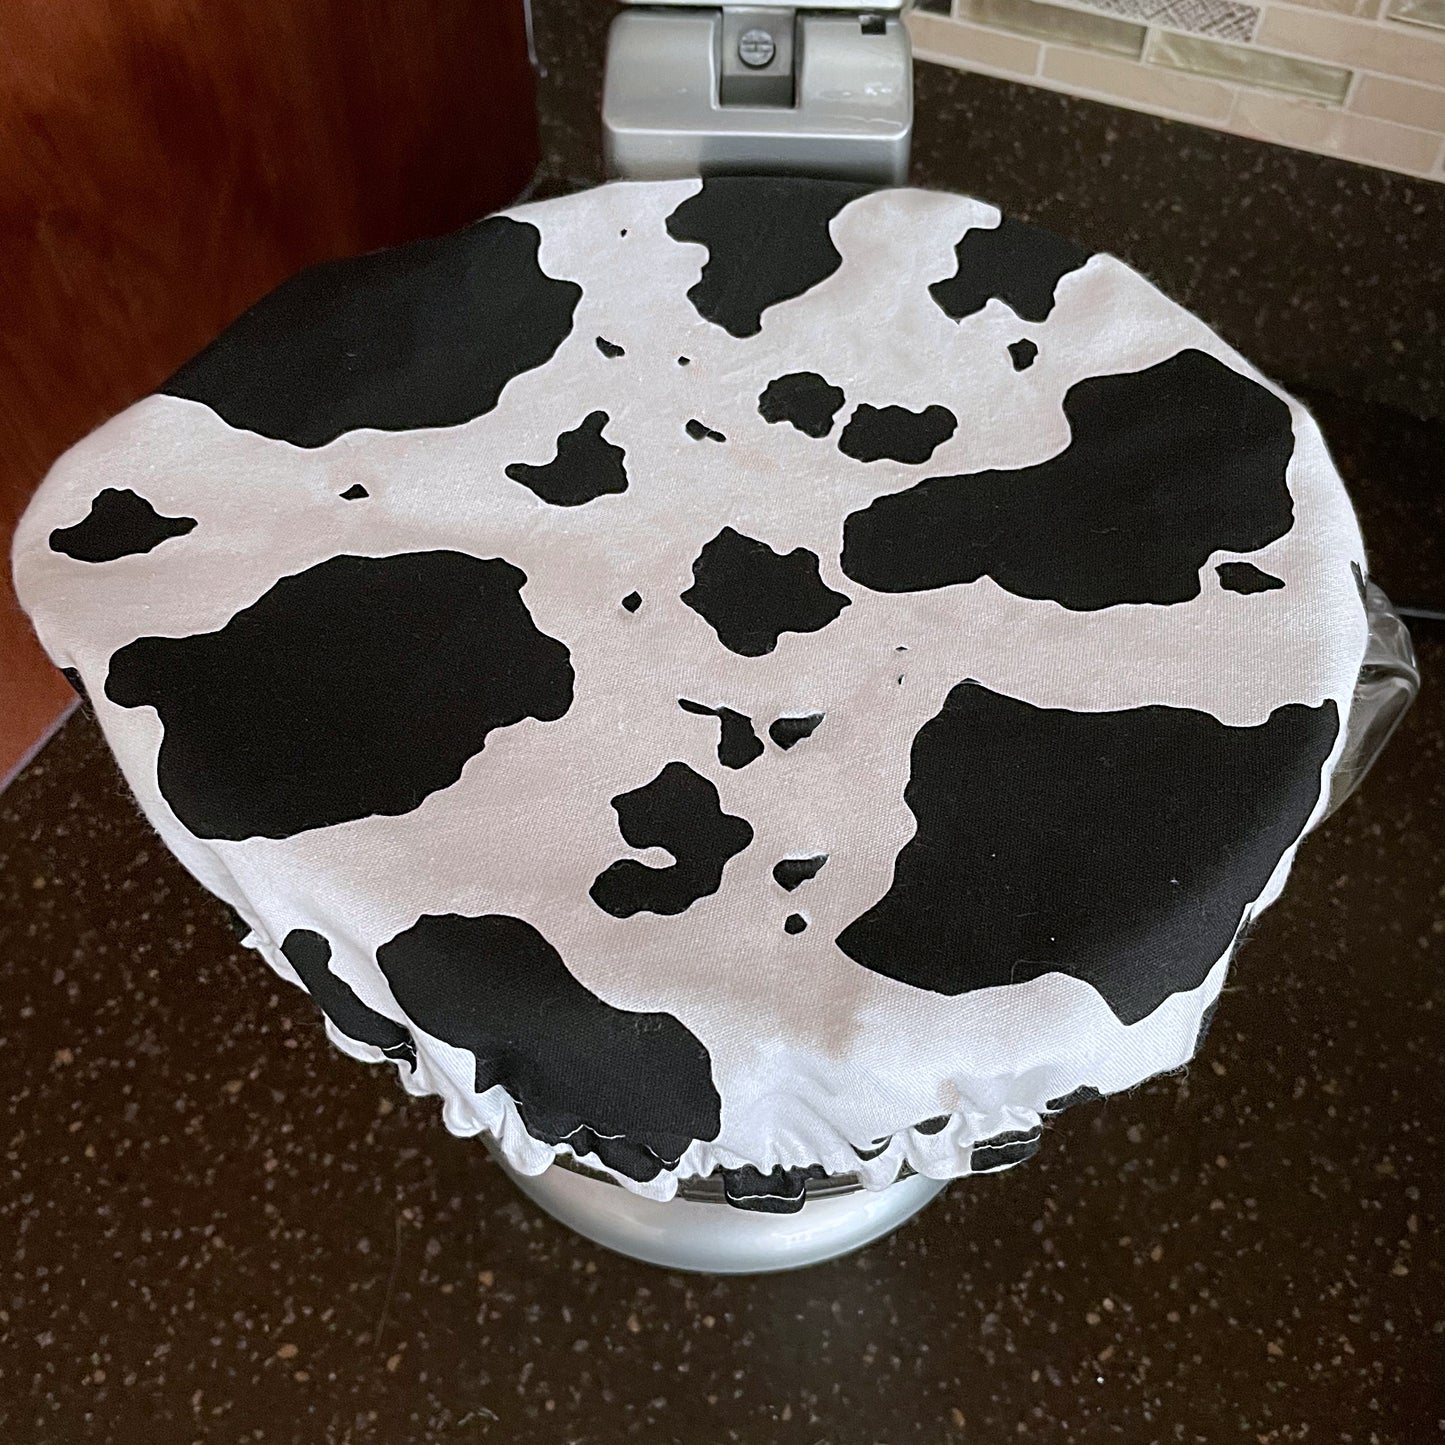 Stand Mixer Bowl Covers - Cow Print